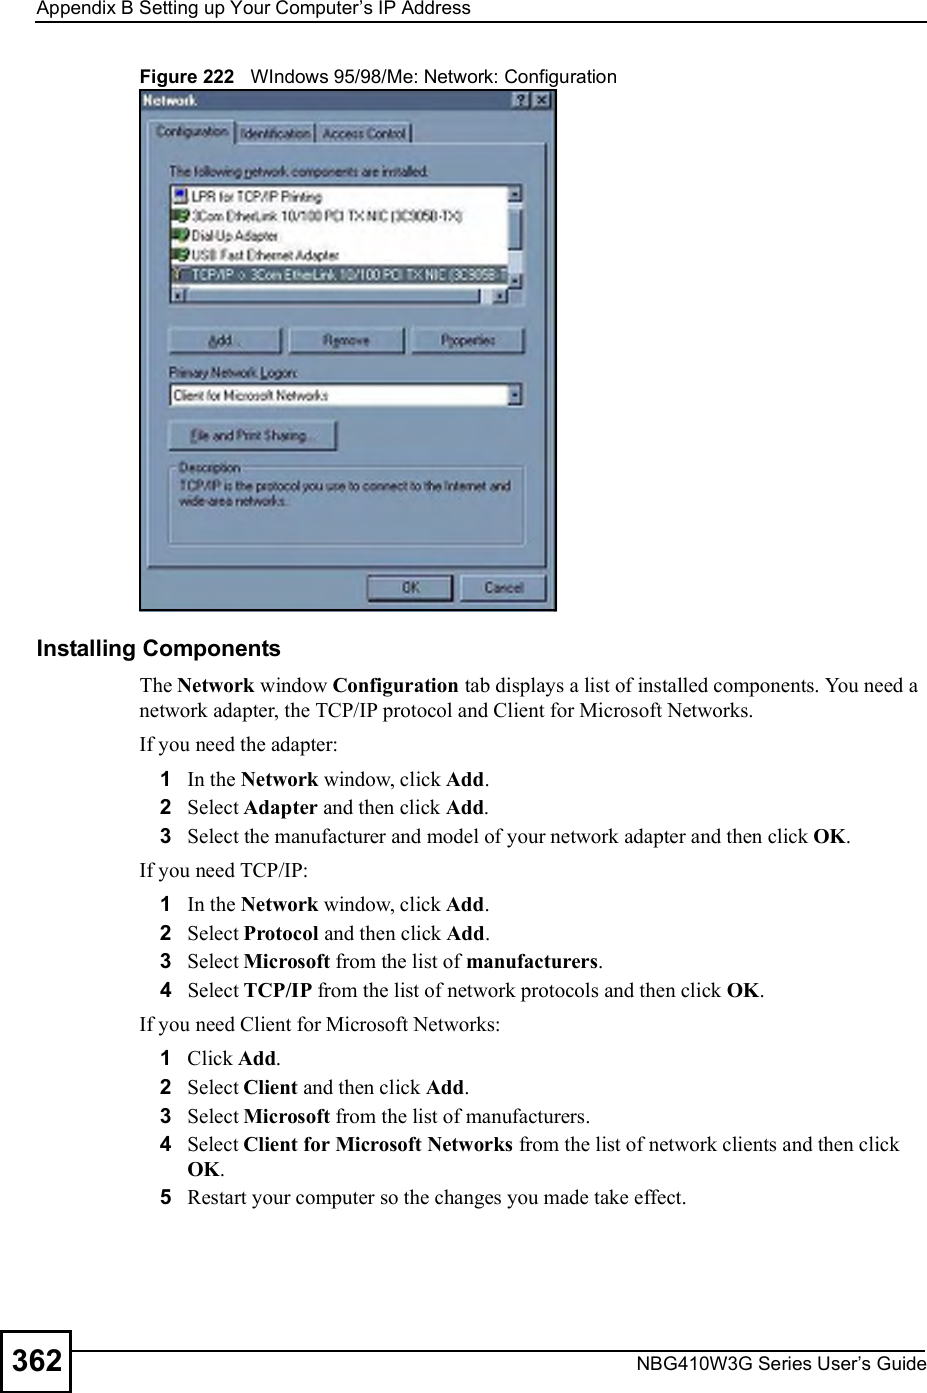 Appendix BSetting up Your Computer s IP AddressNBG410W3G Series User s Guide362Figure 222   WIndows 95/98/Me: Network: ConfigurationInstalling ComponentsThe Network window Configuration tab displays a list of installed components. You need a network adapter, the TCP/IP protocol and Client for Microsoft Networks.If you need the adapter:1In the Network window, click Add.2Select Adapter and then click Add.3Select the manufacturer and model of your network adapter and then click OK.If you need TCP/IP:1In the Network window, click Add.2Select Protocol and then click Add.3Select Microsoft from the list of manufacturers.4Select TCP/IP from the list of network protocols and then click OK.If you need Client for Microsoft Networks:1Click Add.2Select Client and then click Add.3Select Microsoft from the list of manufacturers.4Select Client for Microsoft Networks from the list of network clients and then click OK.5Restart your computer so the changes you made take effect.